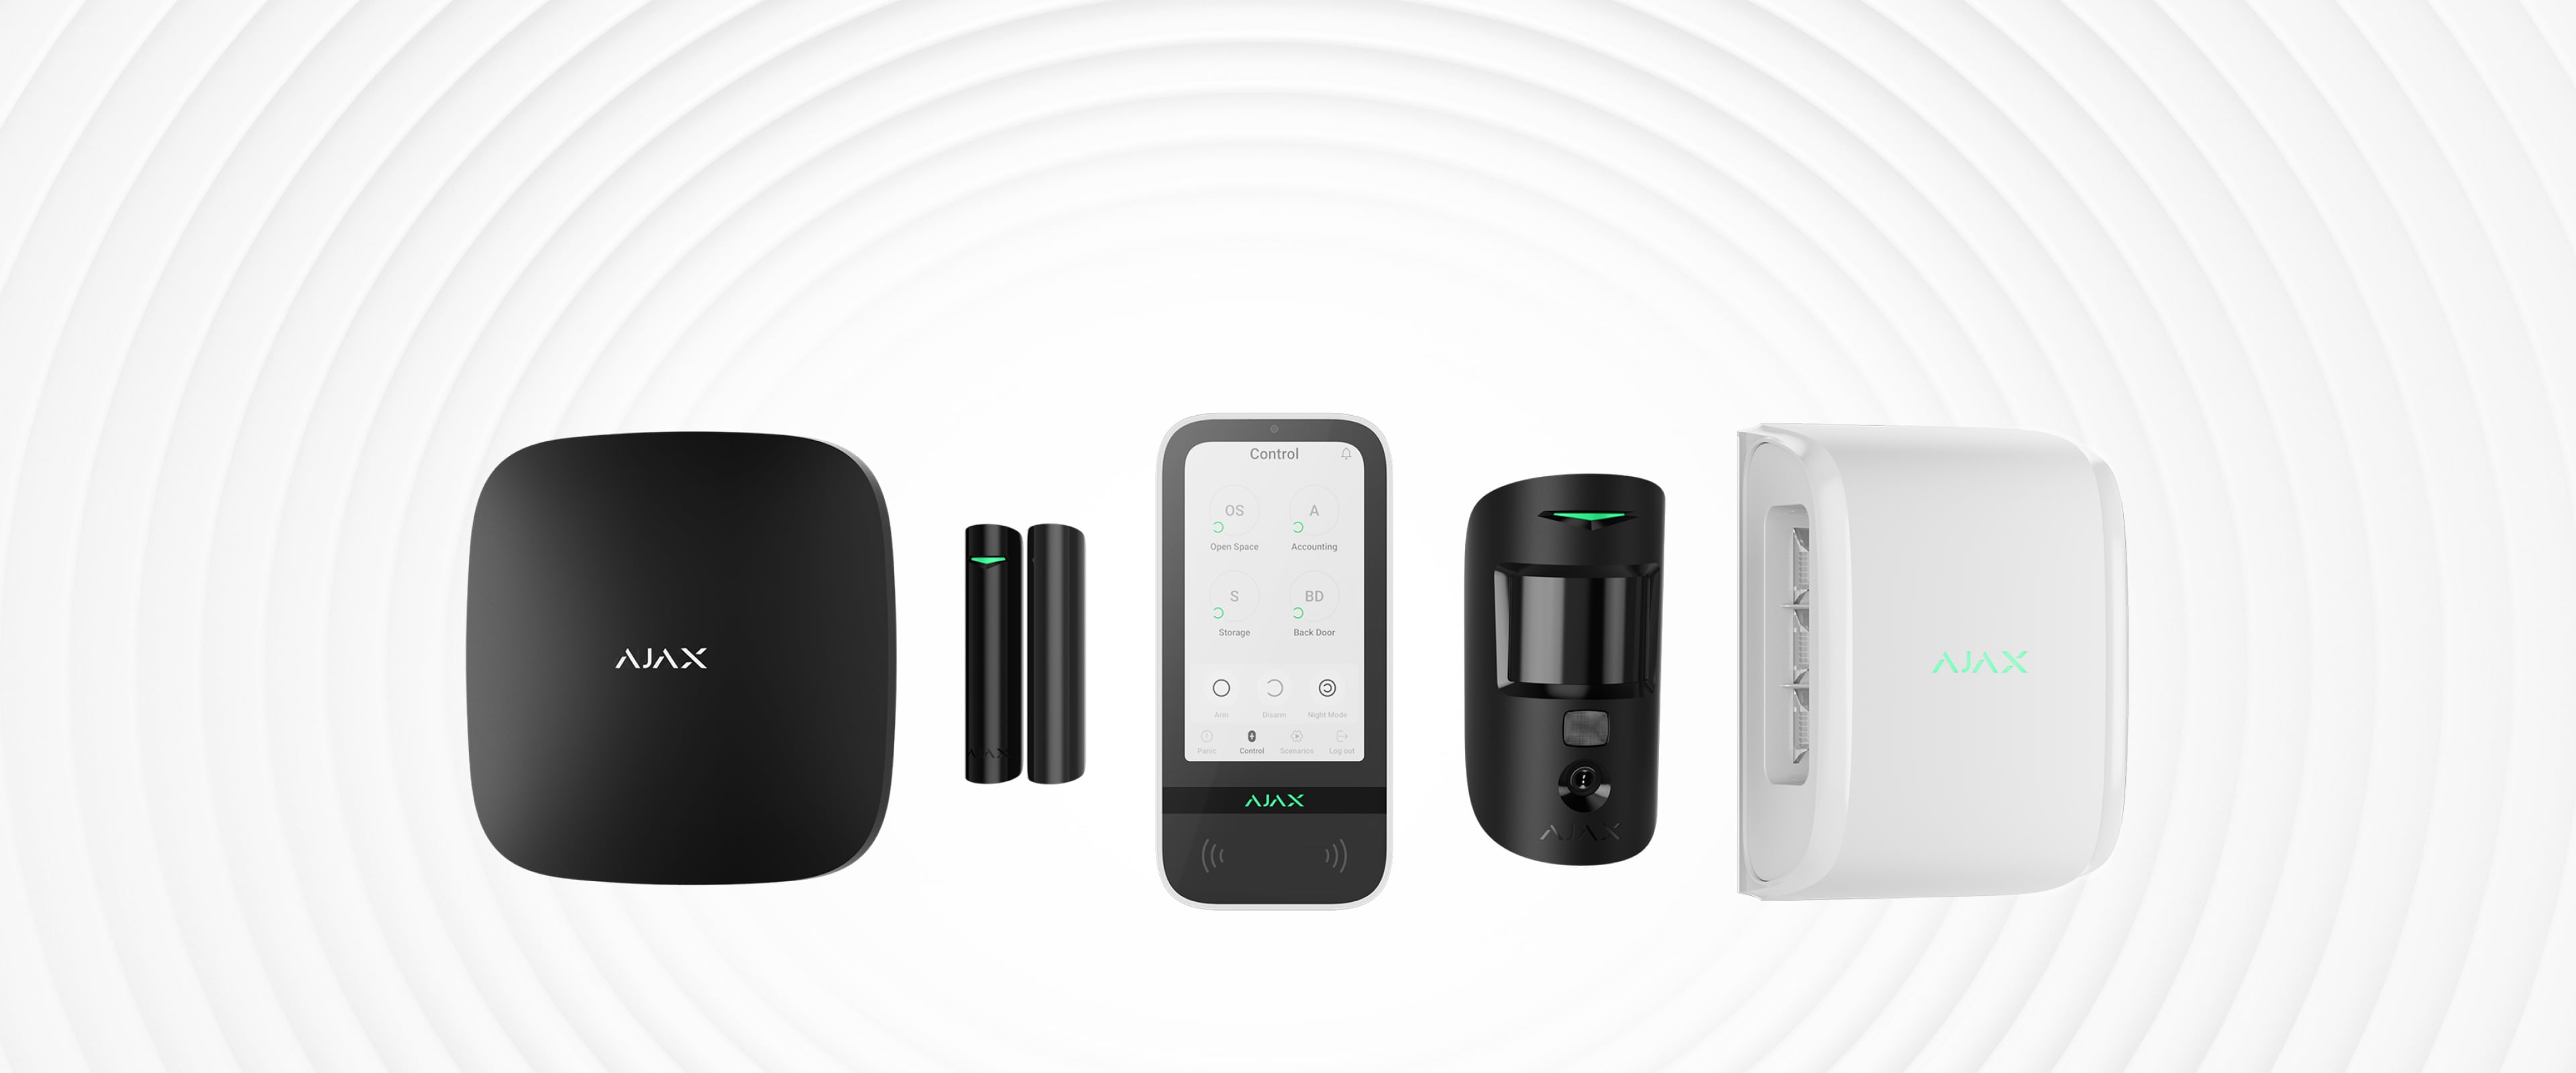 Ajax wireless security system devices